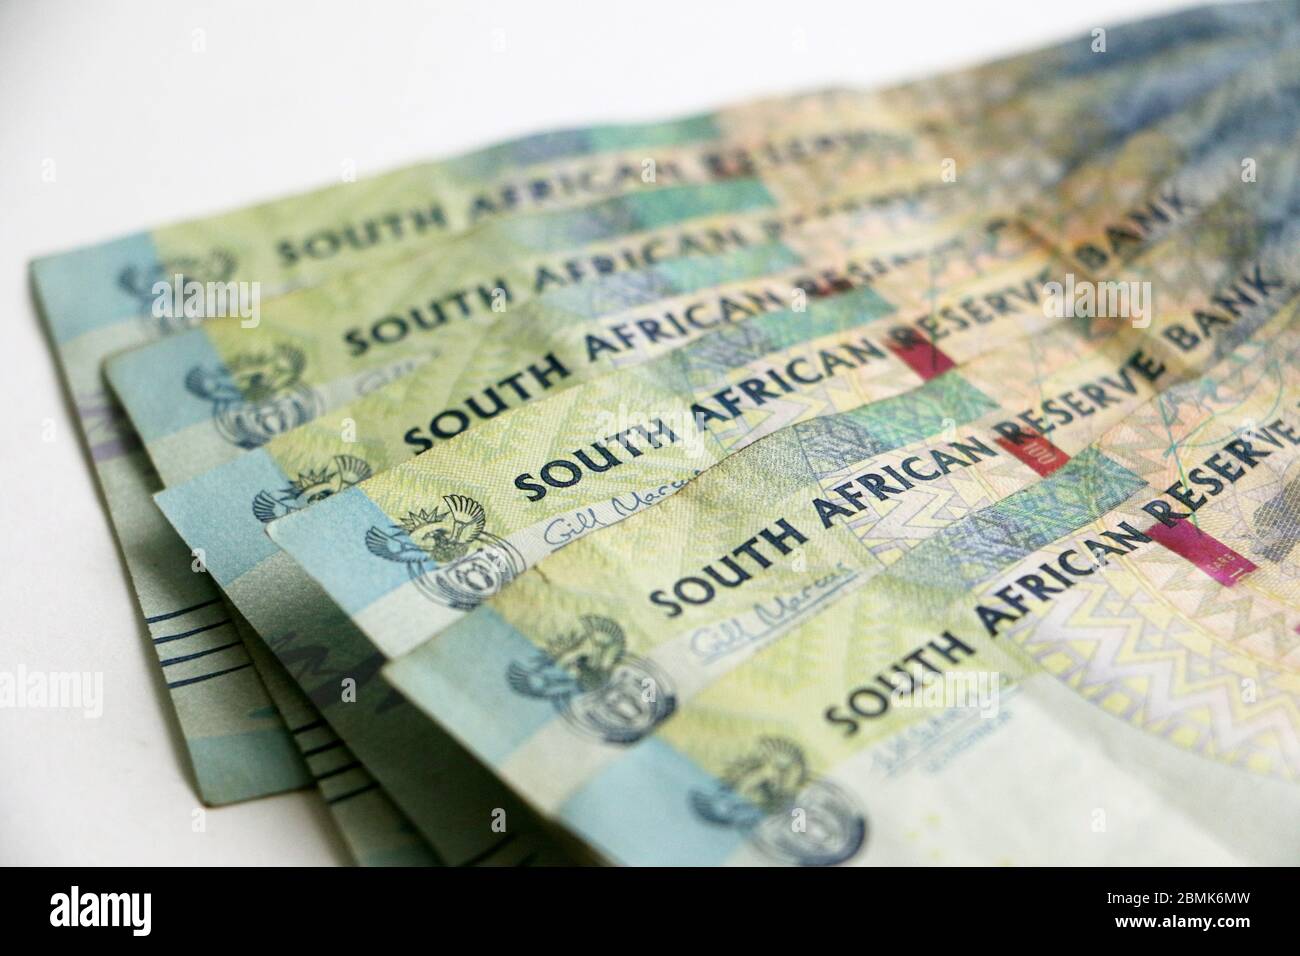 South African currency money rands notes scattered on white background Stock Photo